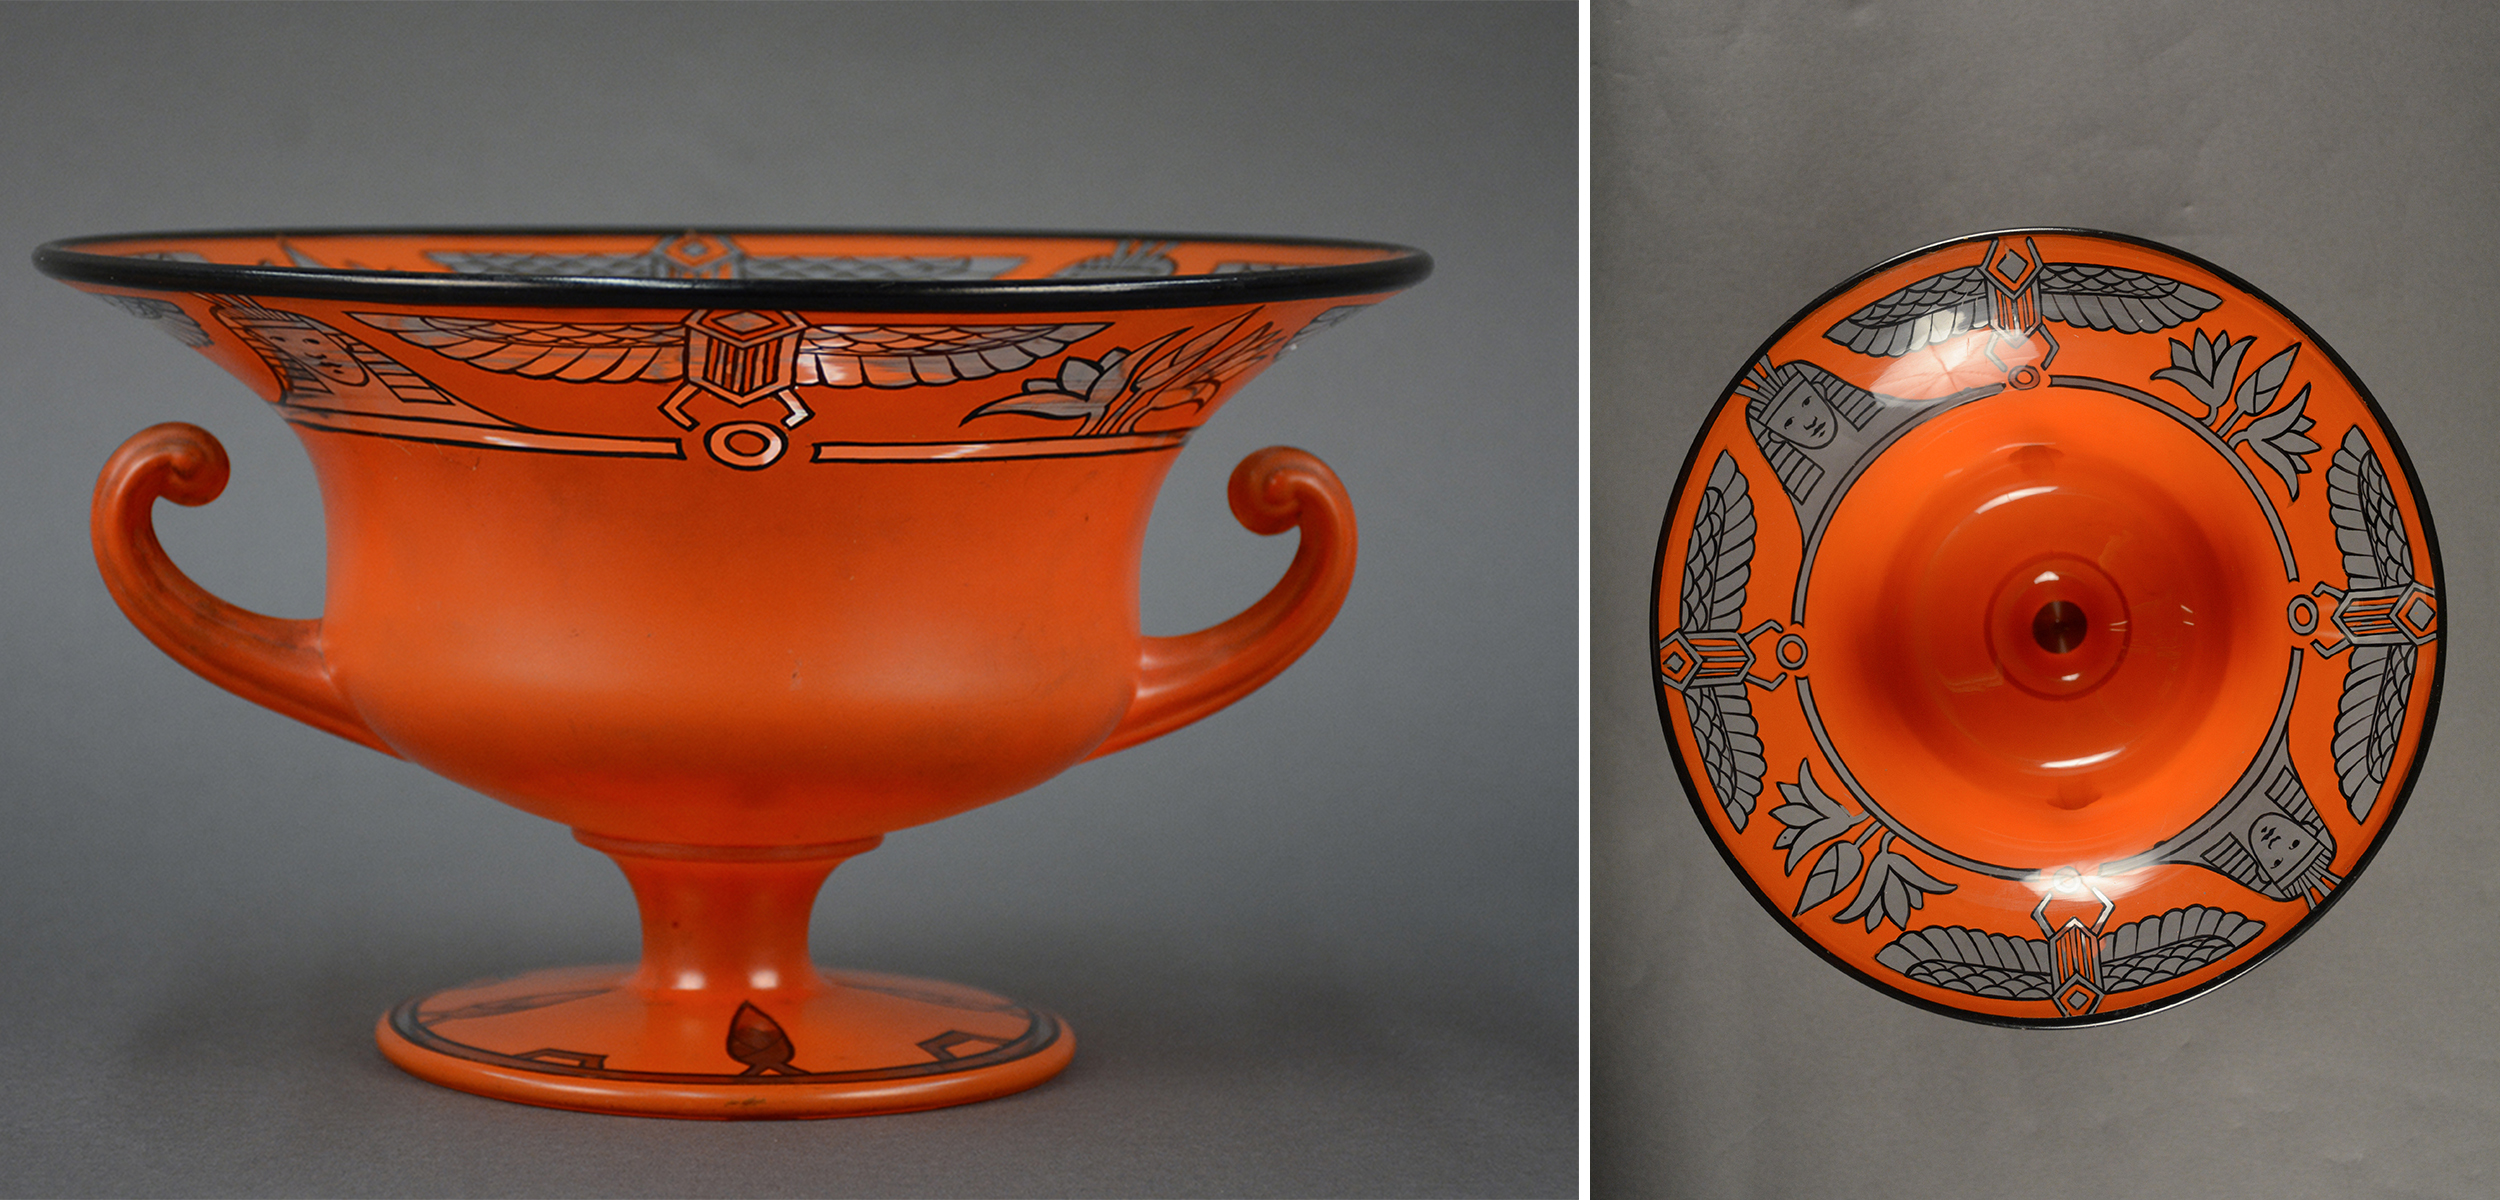 Egyptian Revival compote, c. 1924. Orange painted colorless glass compote with ancient Egyptian style decoration. Made by Tiffin Glass Co., then a division of U.S. Glass Co. of Pittsburgh. Currently on display in Glass: Shattering Notions. Heinz History Center Collection.